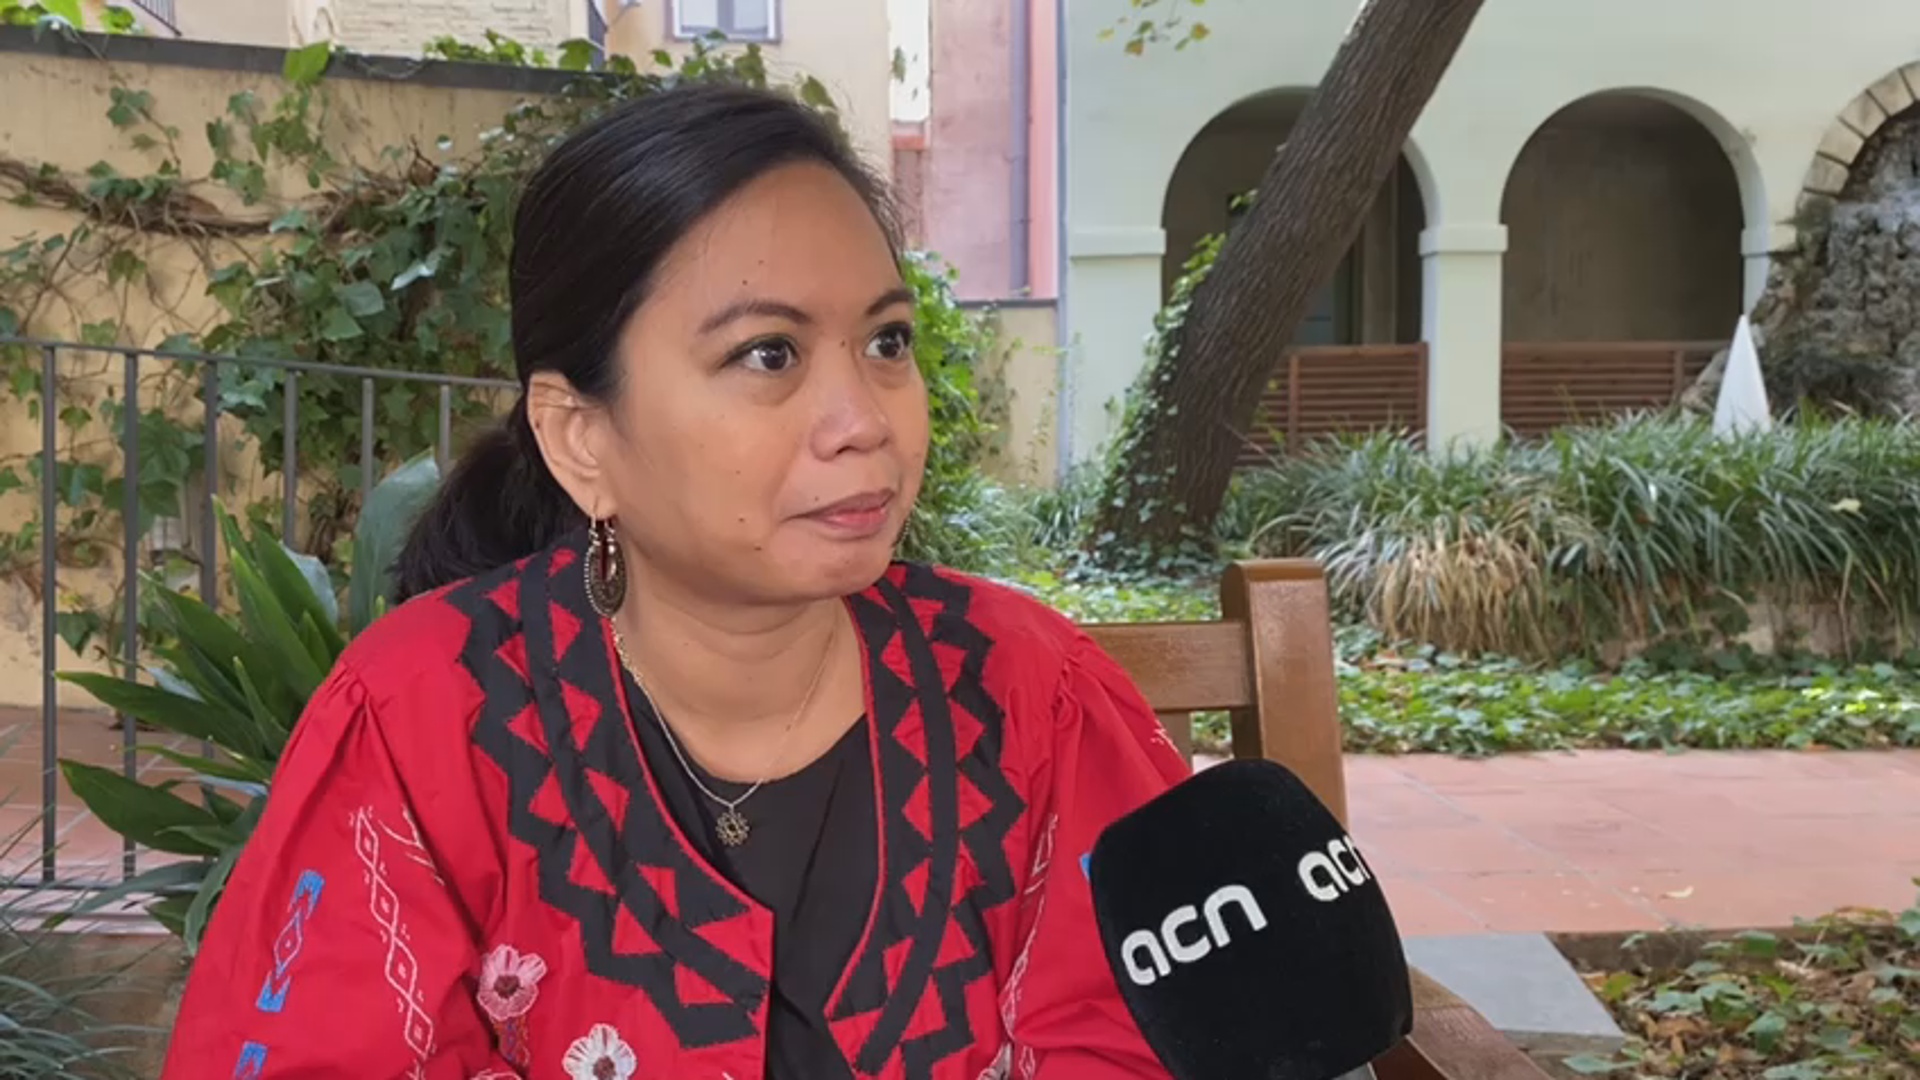 Filipino lawyer Czarina Musni during her interview with Catalan News (by Xènia Palau)